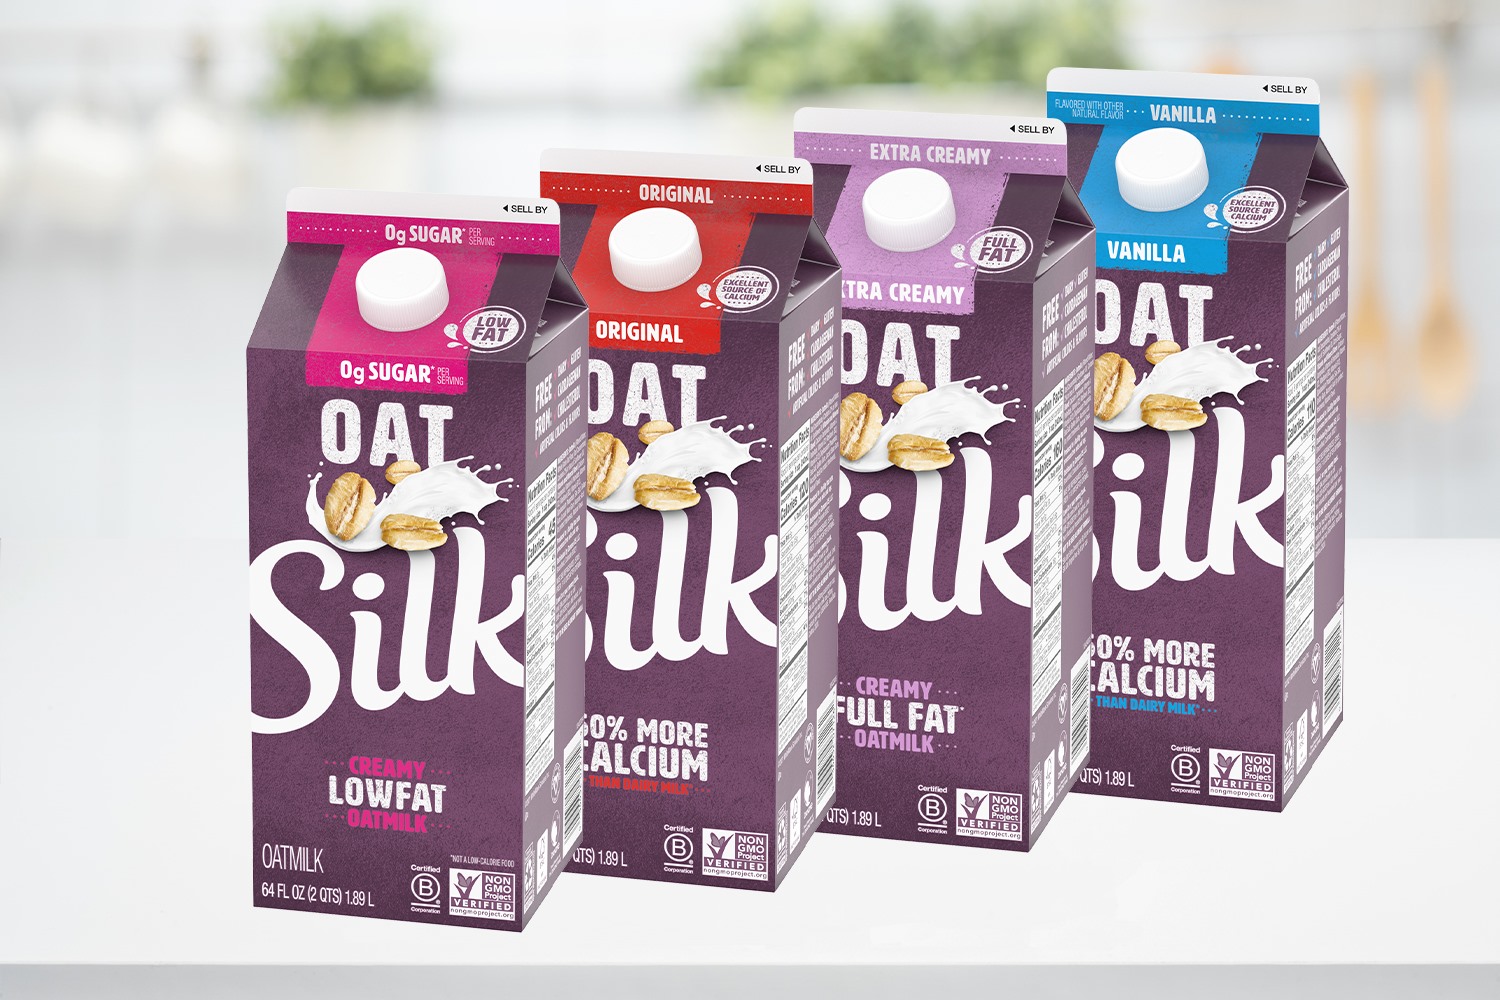 Silk Oat Milk Review with Ingredients, Allergen Info an More. Plus, leave your own rating! Dairy-free, plant-based, nut-free, and soy-free.